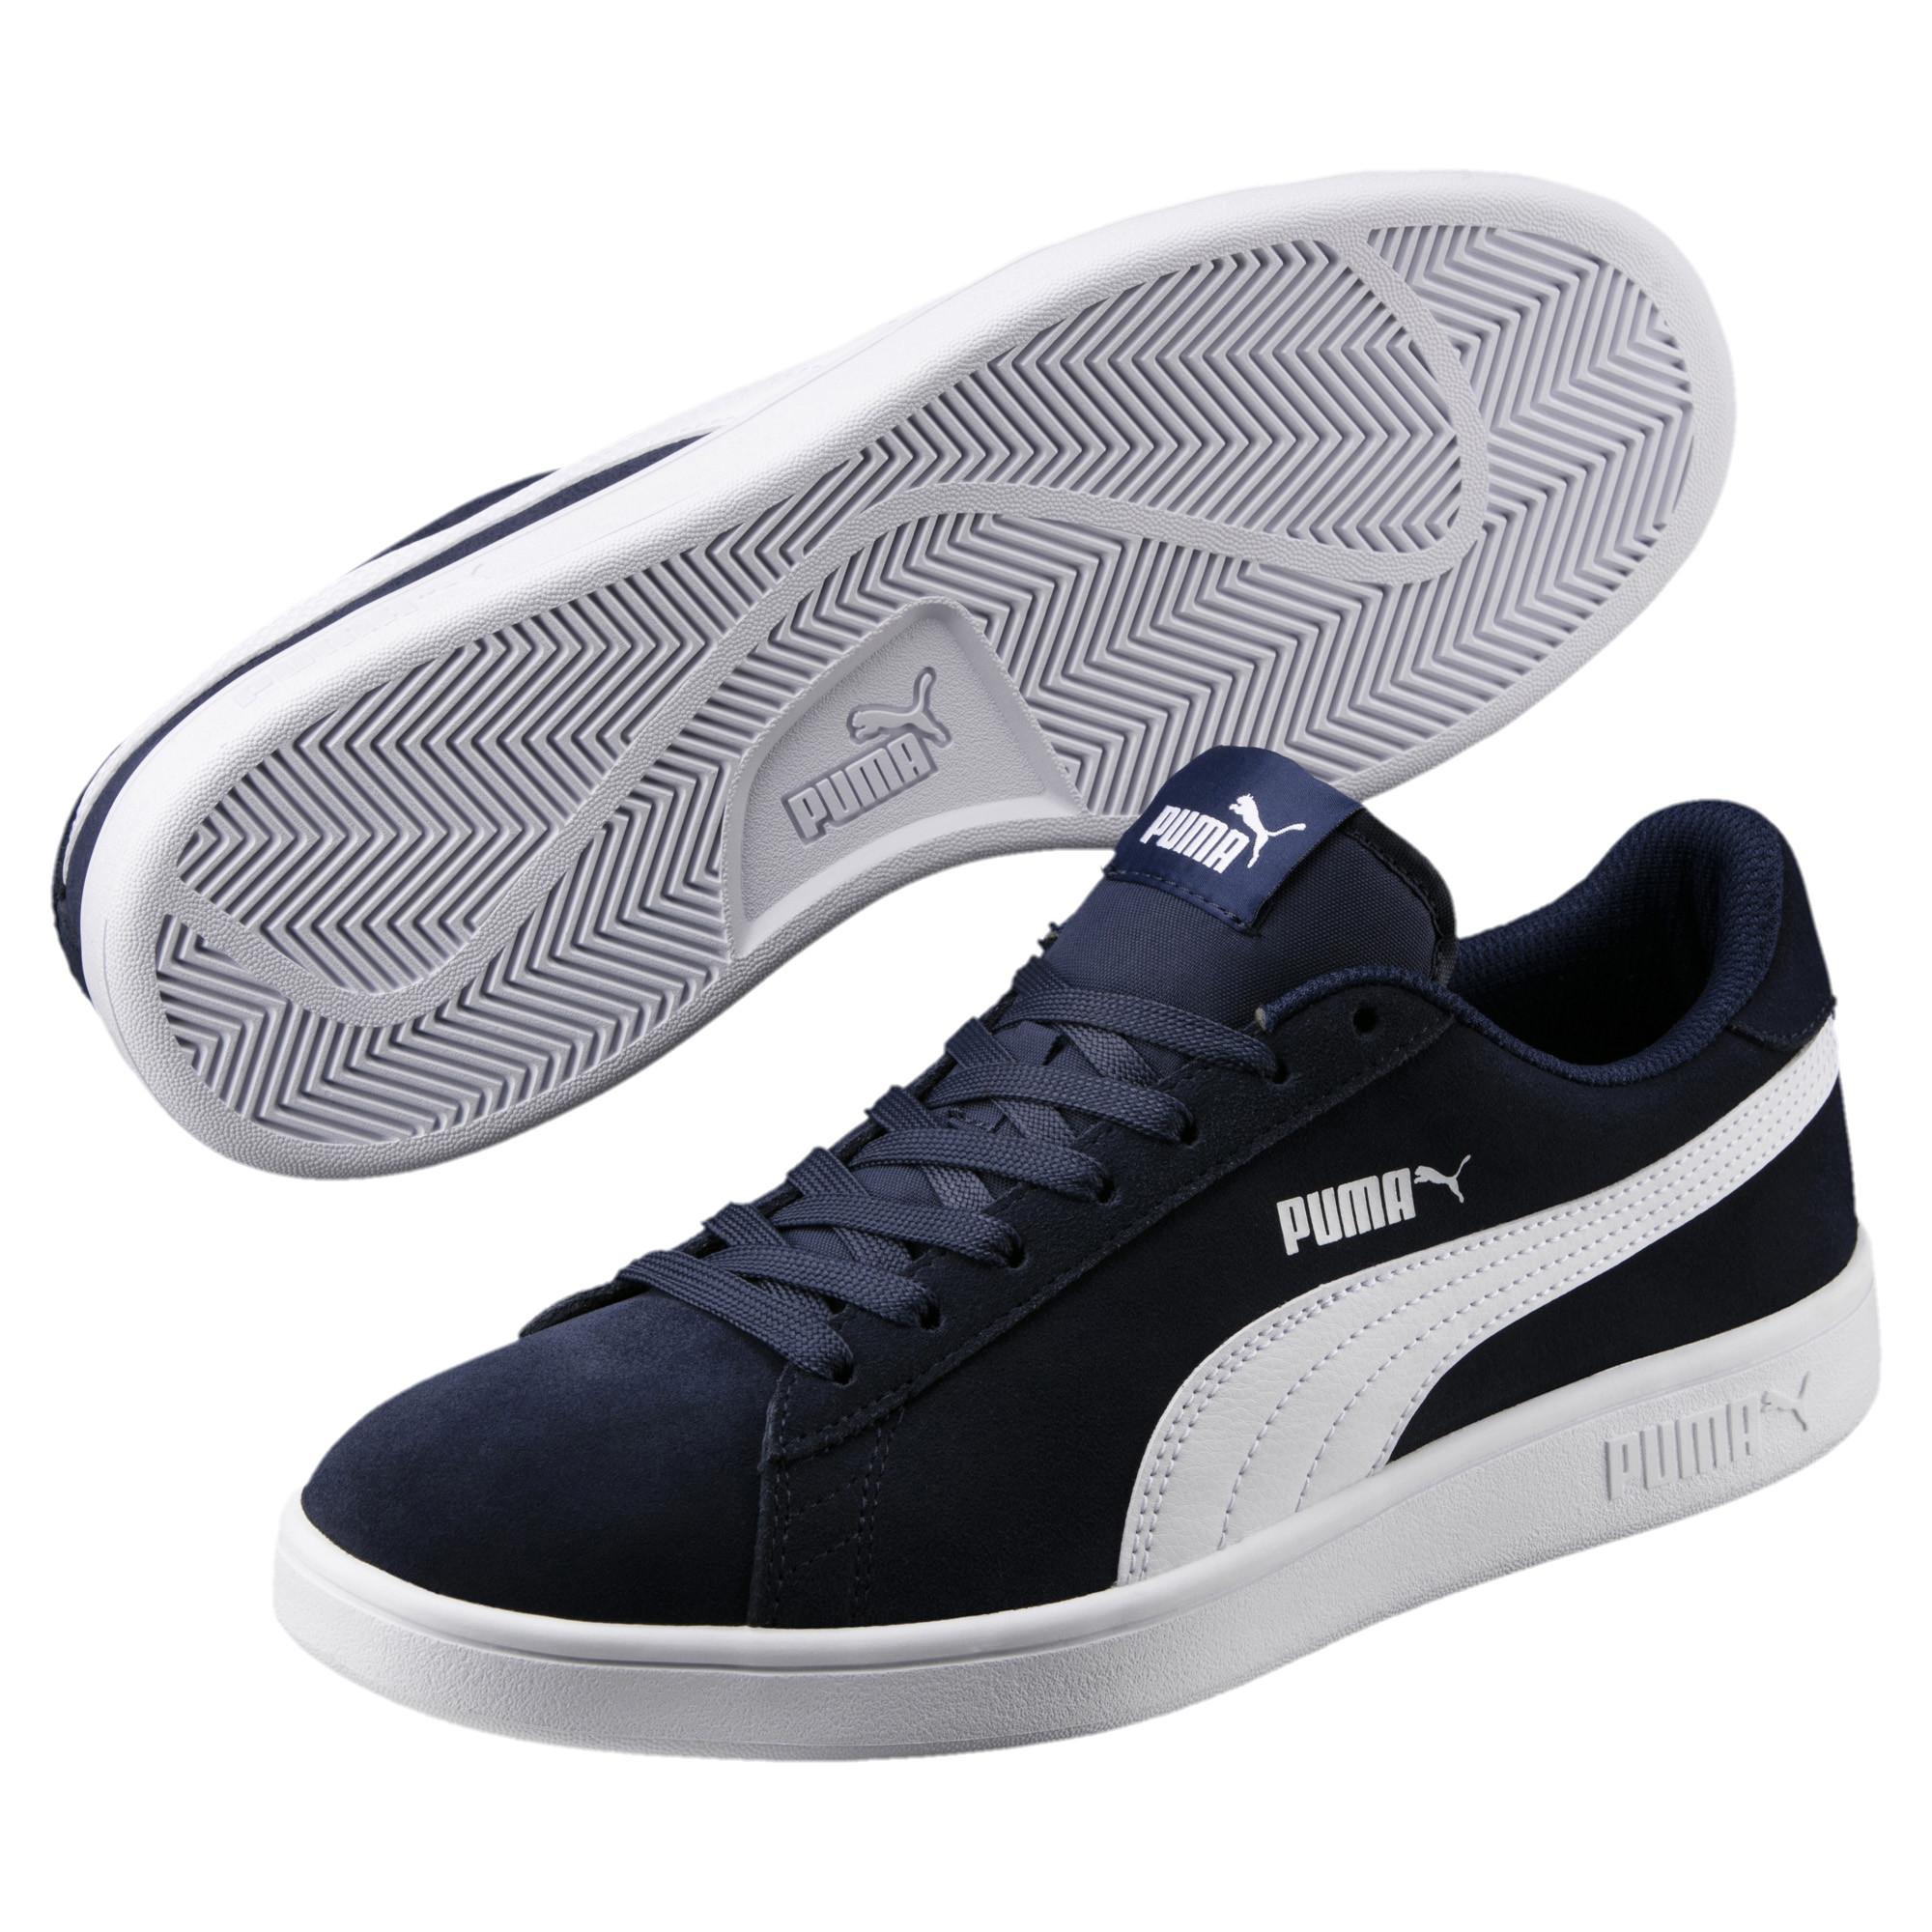 PUMA Suede Smash V2 Sneakers in Blue for Men - Lyst